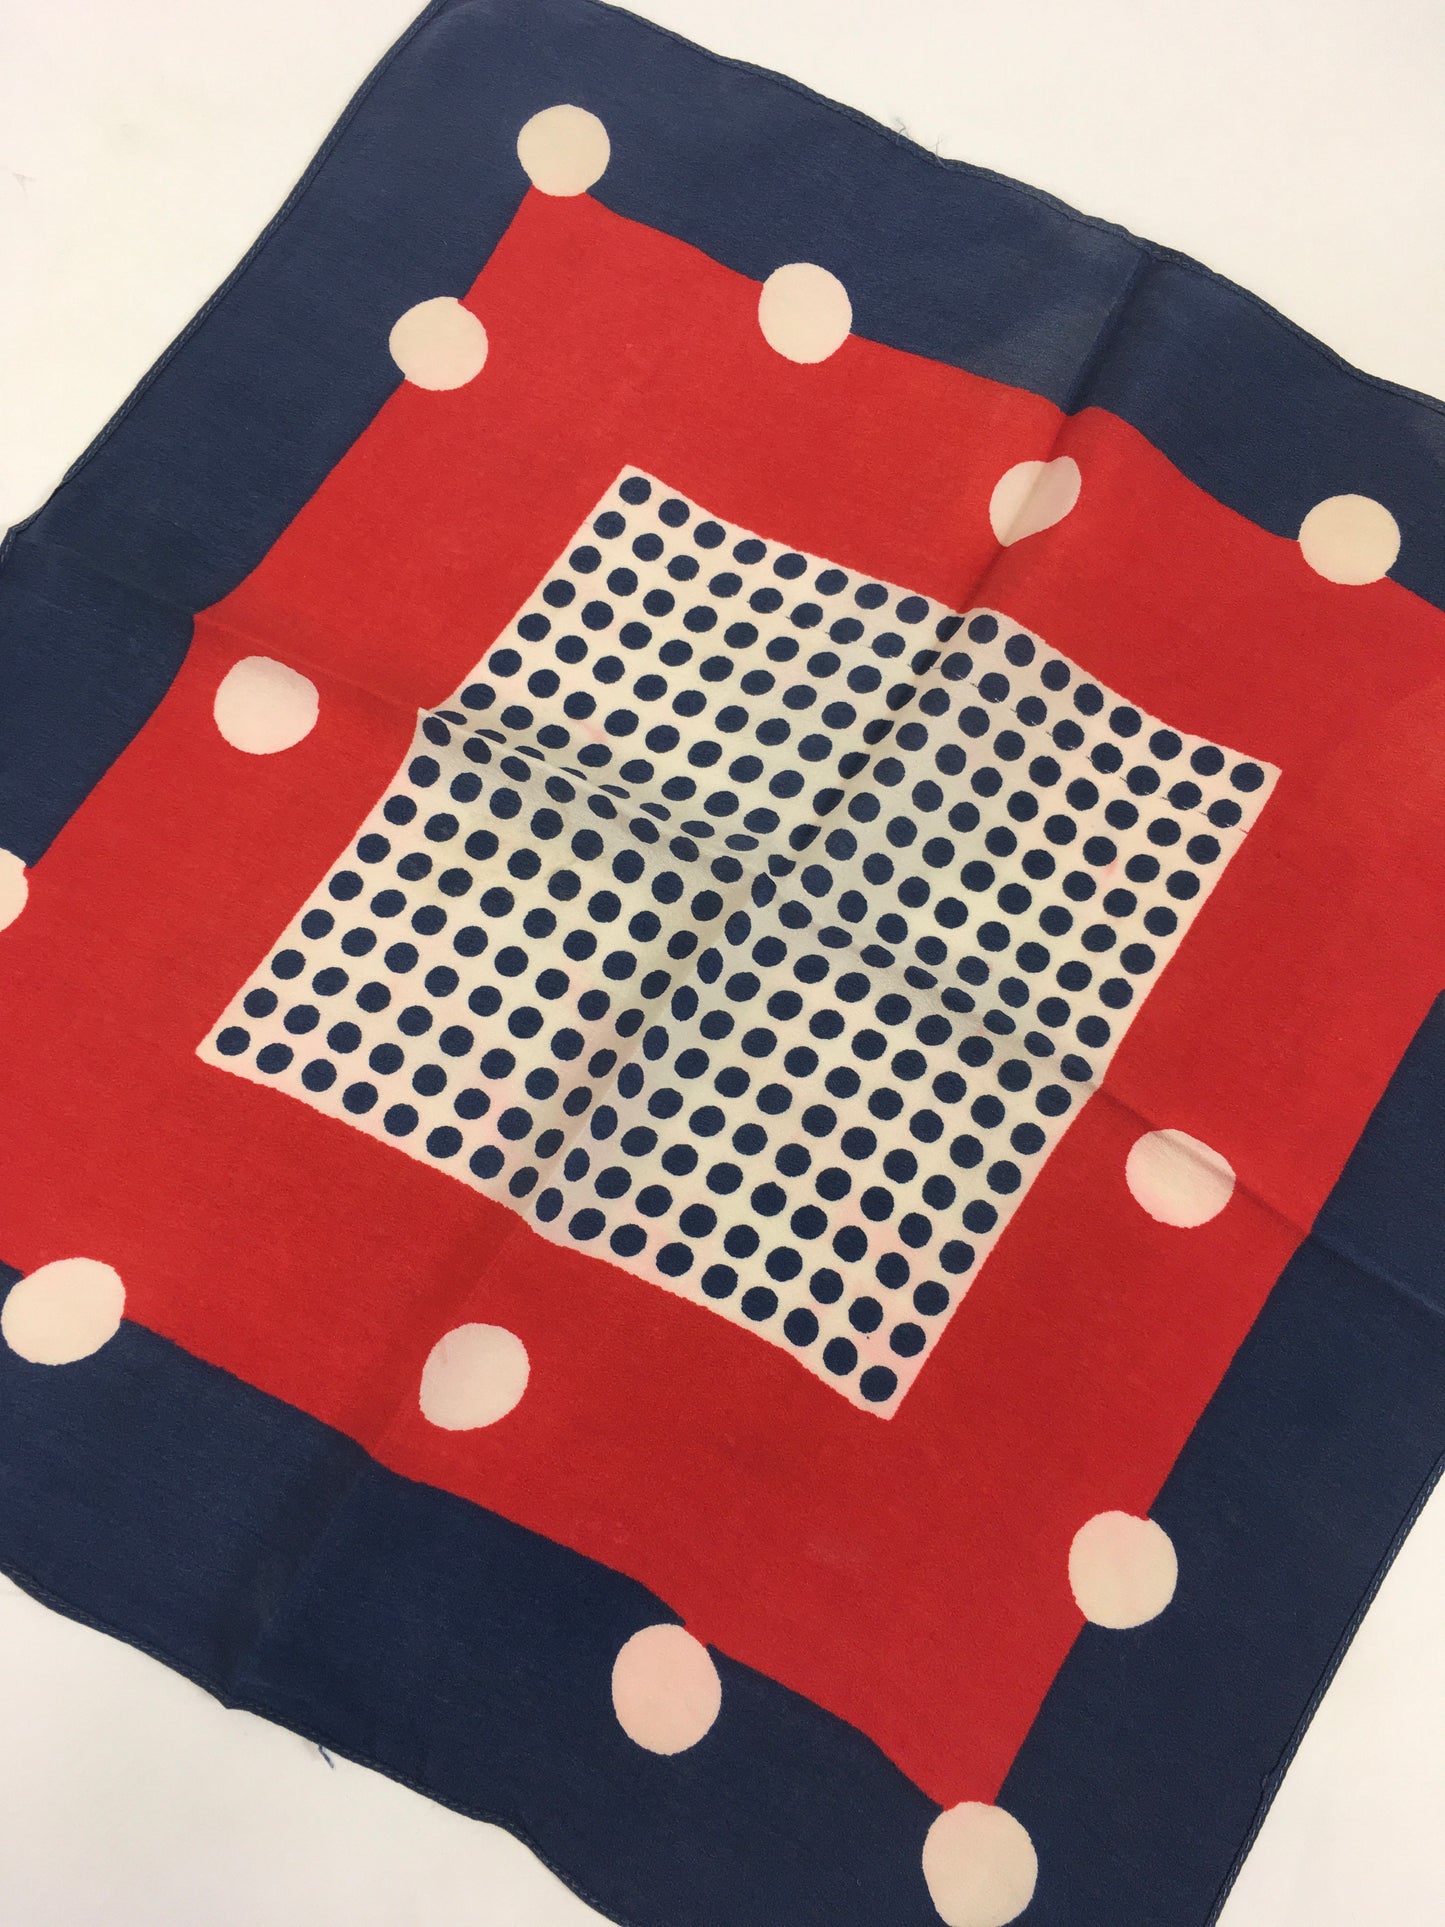 Original 1940's Fabulous Rayon Hankie - In Red, White and Blue